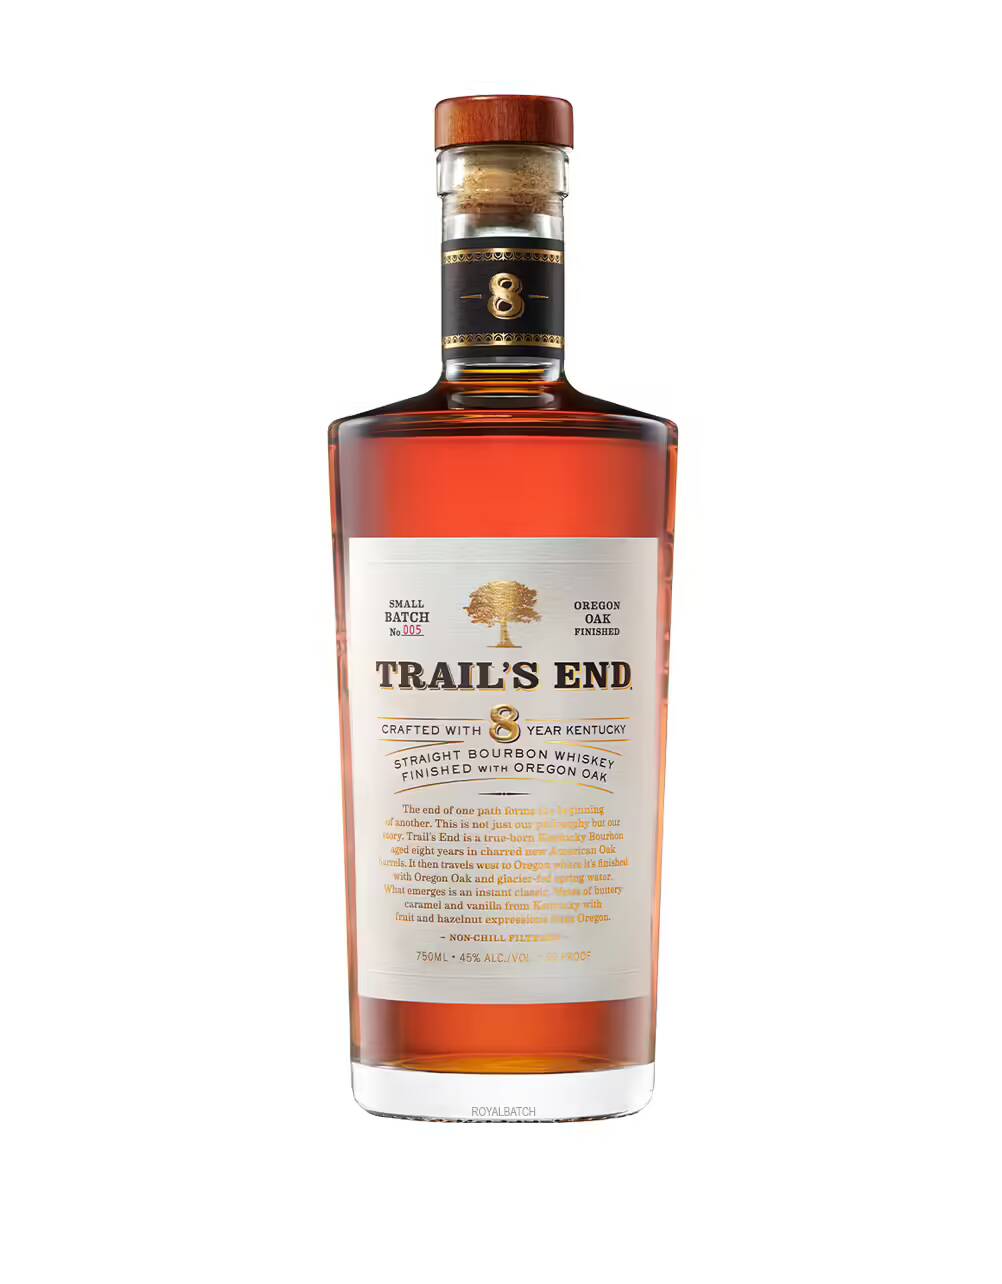 Trails End Small Batch 8 Year Old Kentucky Straight Bourbon Whiskey